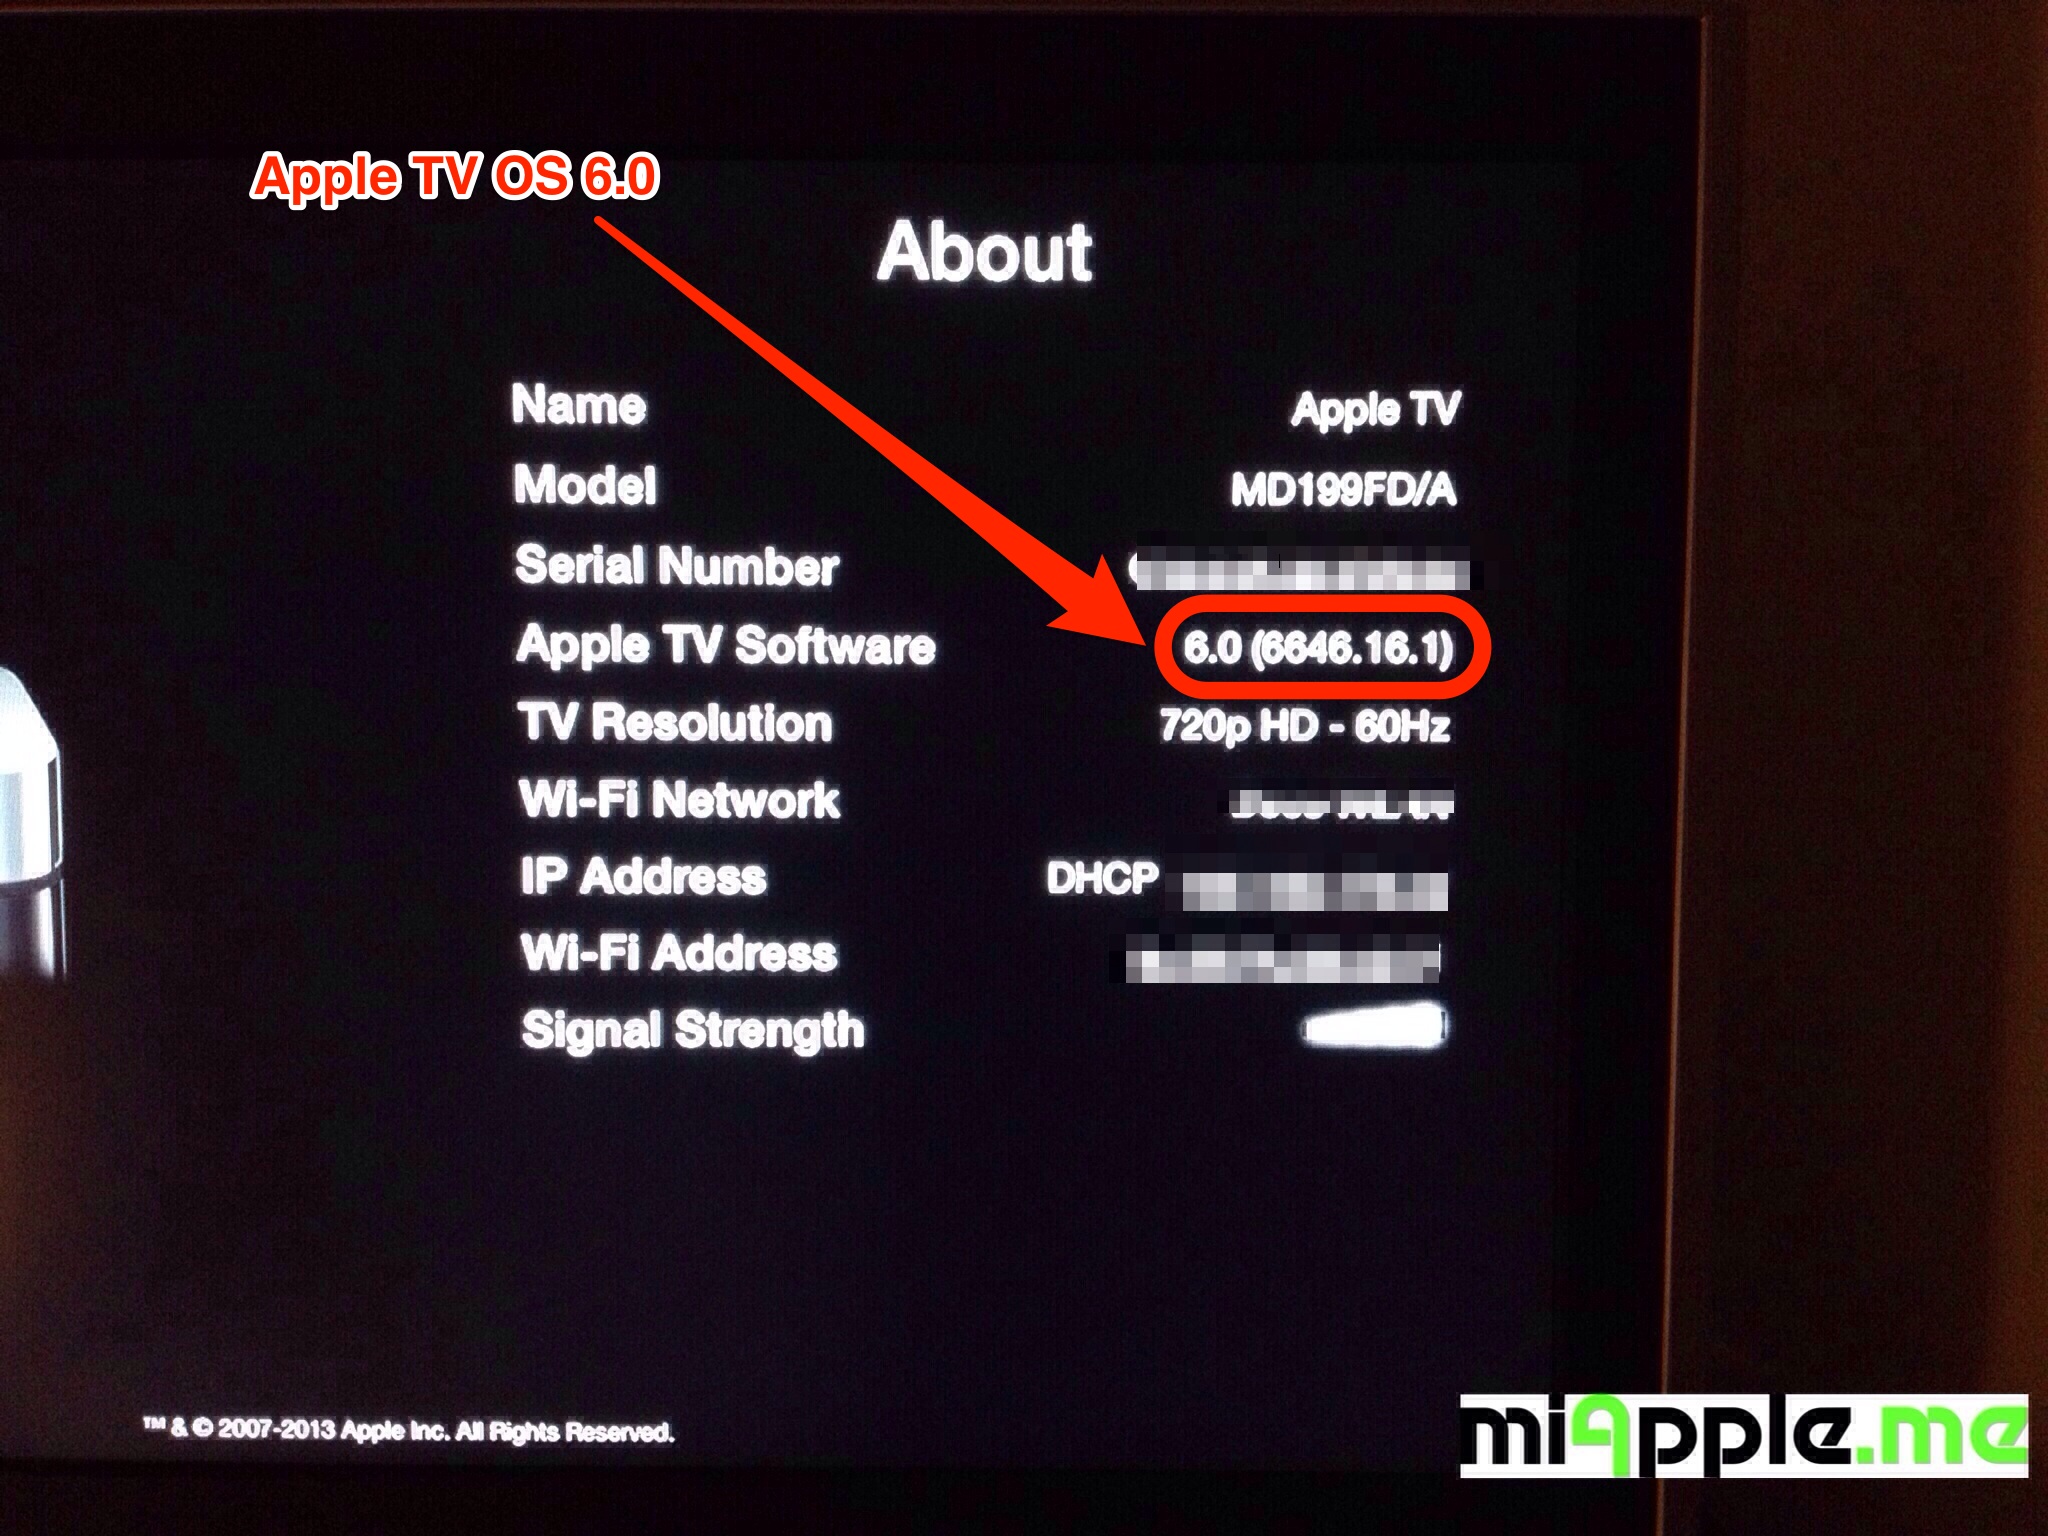 iOS 7 Beta 4: Apple TV Software 5.4 Seed 3 Becomes Update To Version 6.0 - miapple.me - Tech.Blog